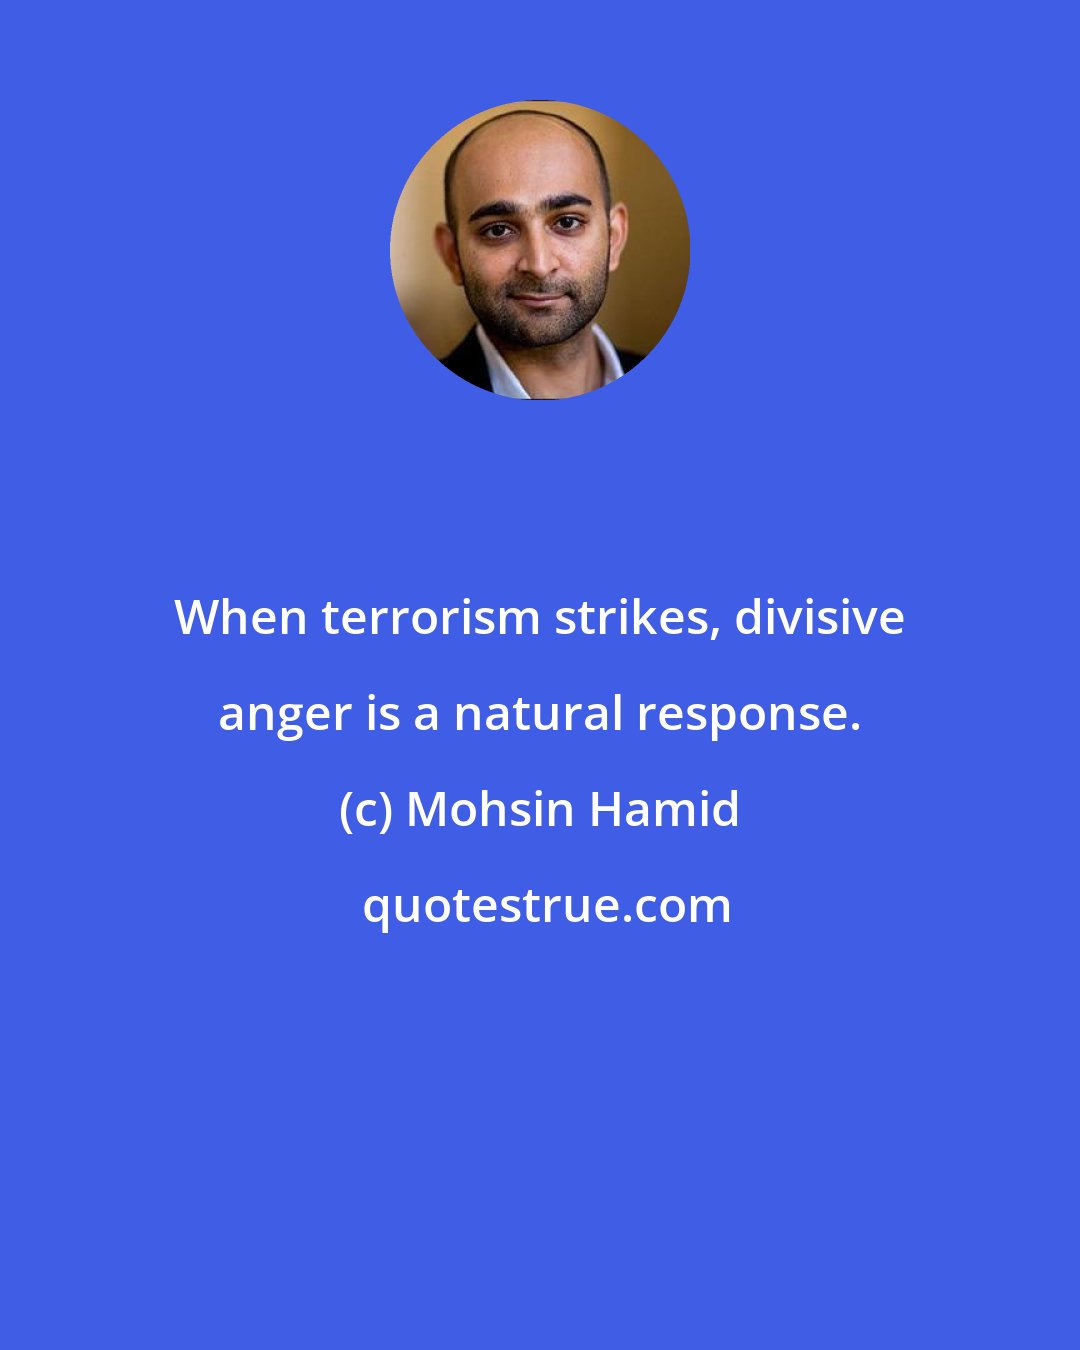 Mohsin Hamid: When terrorism strikes, divisive anger is a natural response.